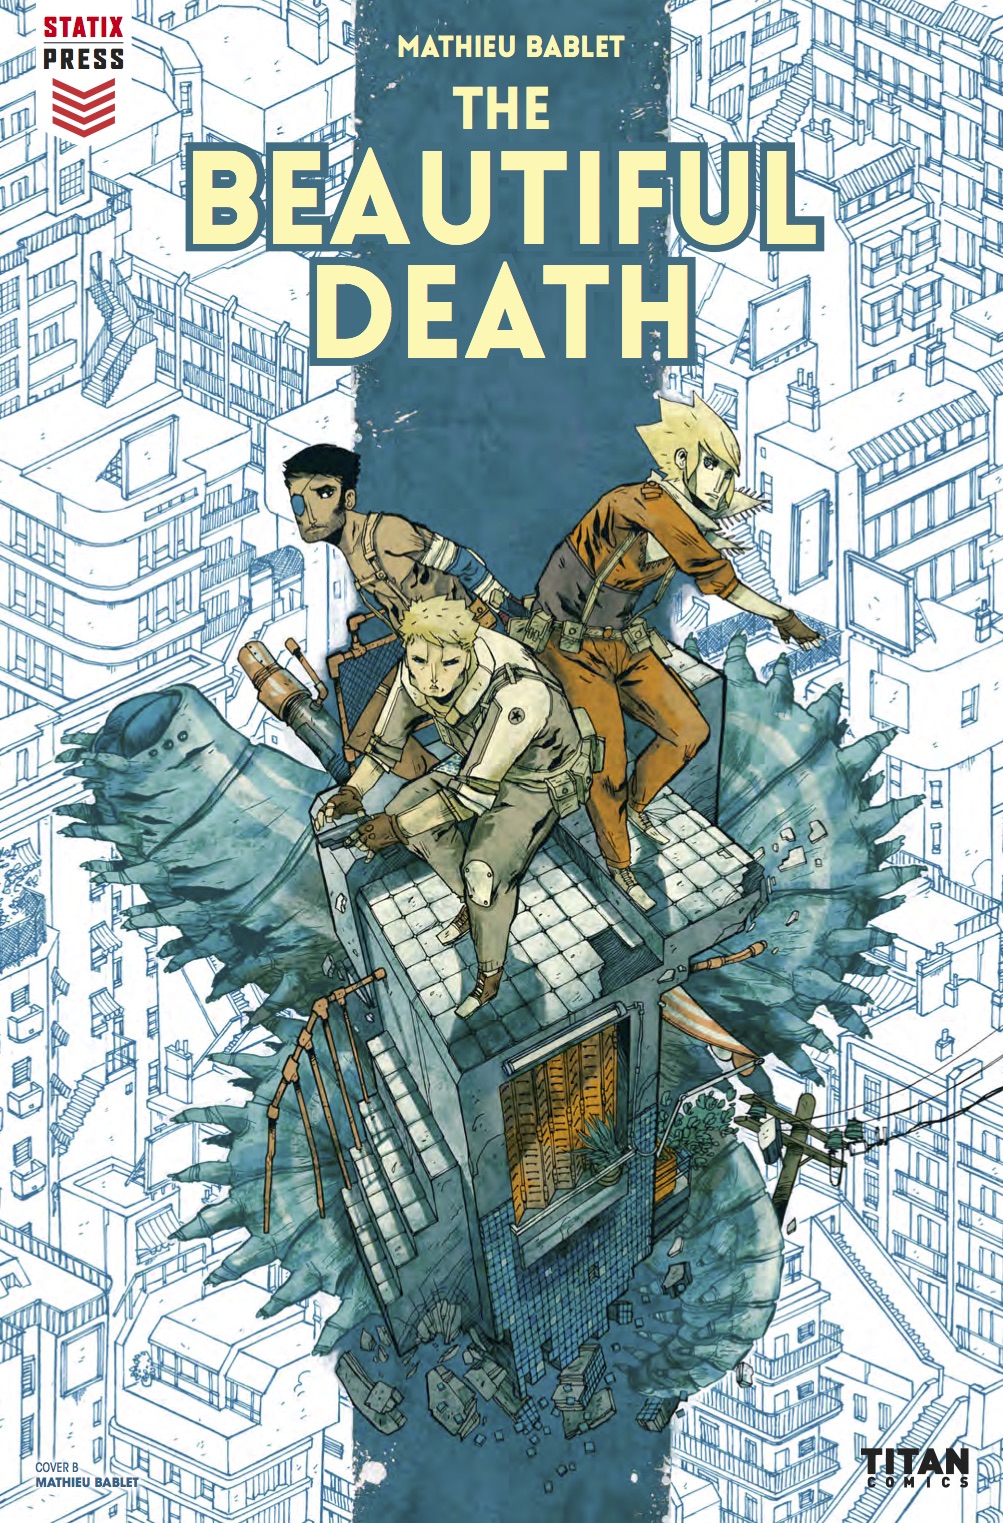 Titan Preview: The Beautiful Death #1